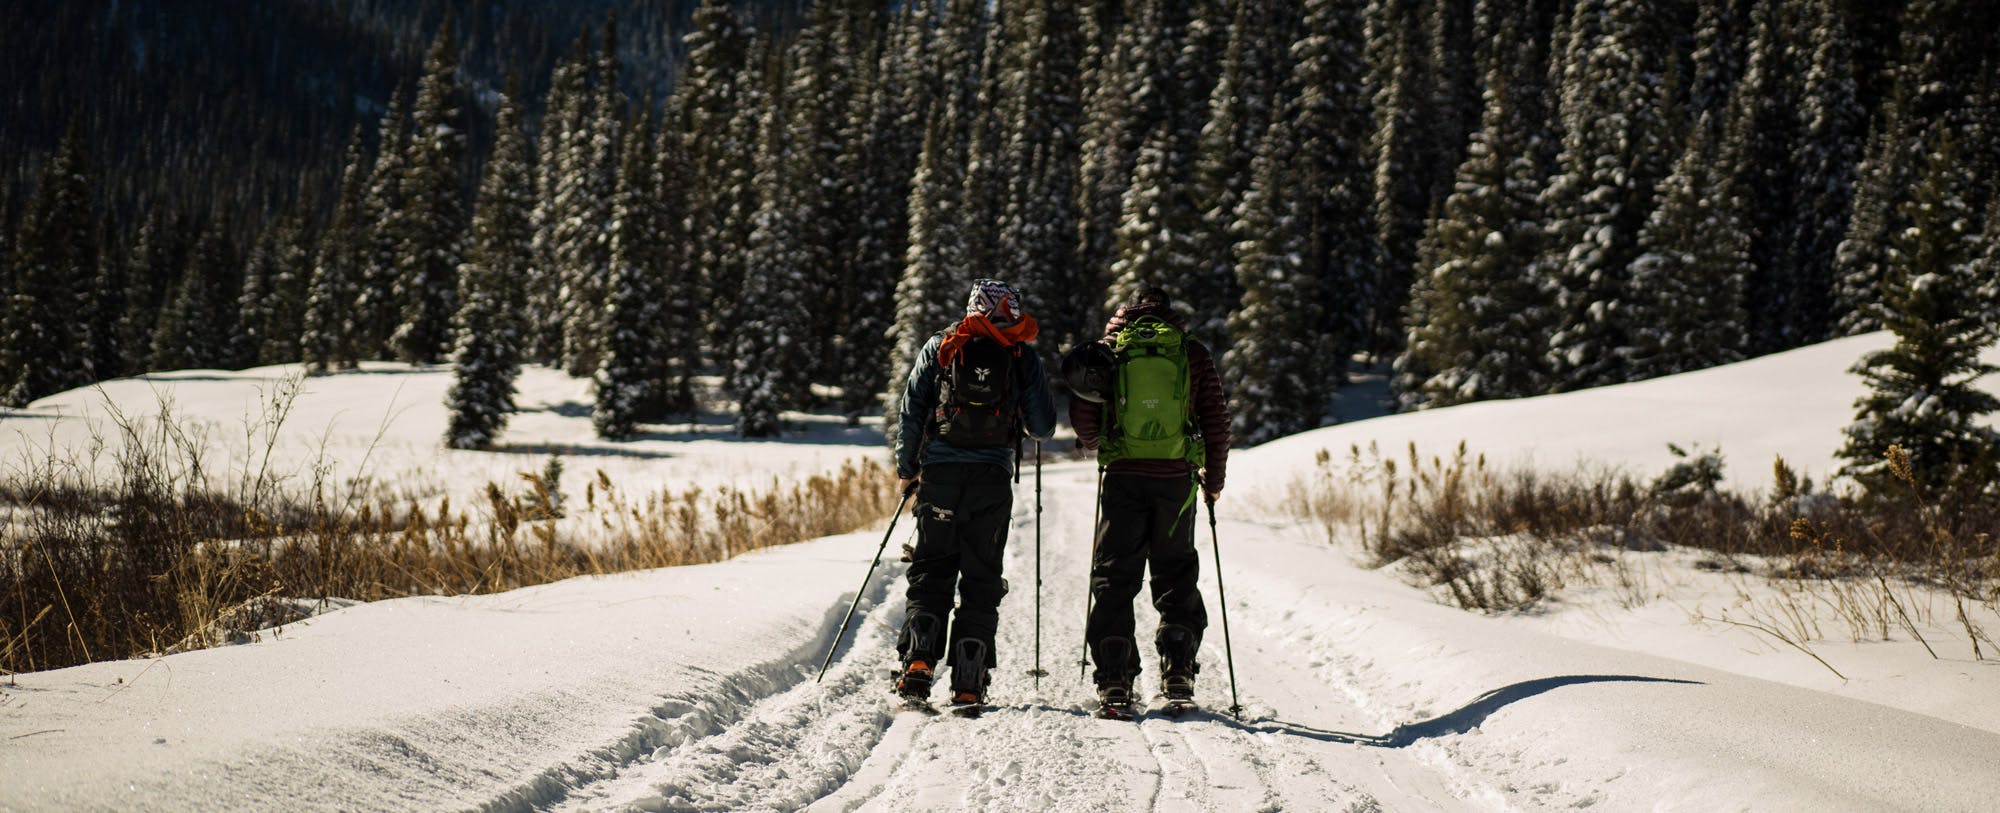 Basin and Range: Backcountry’s Exclusive Line